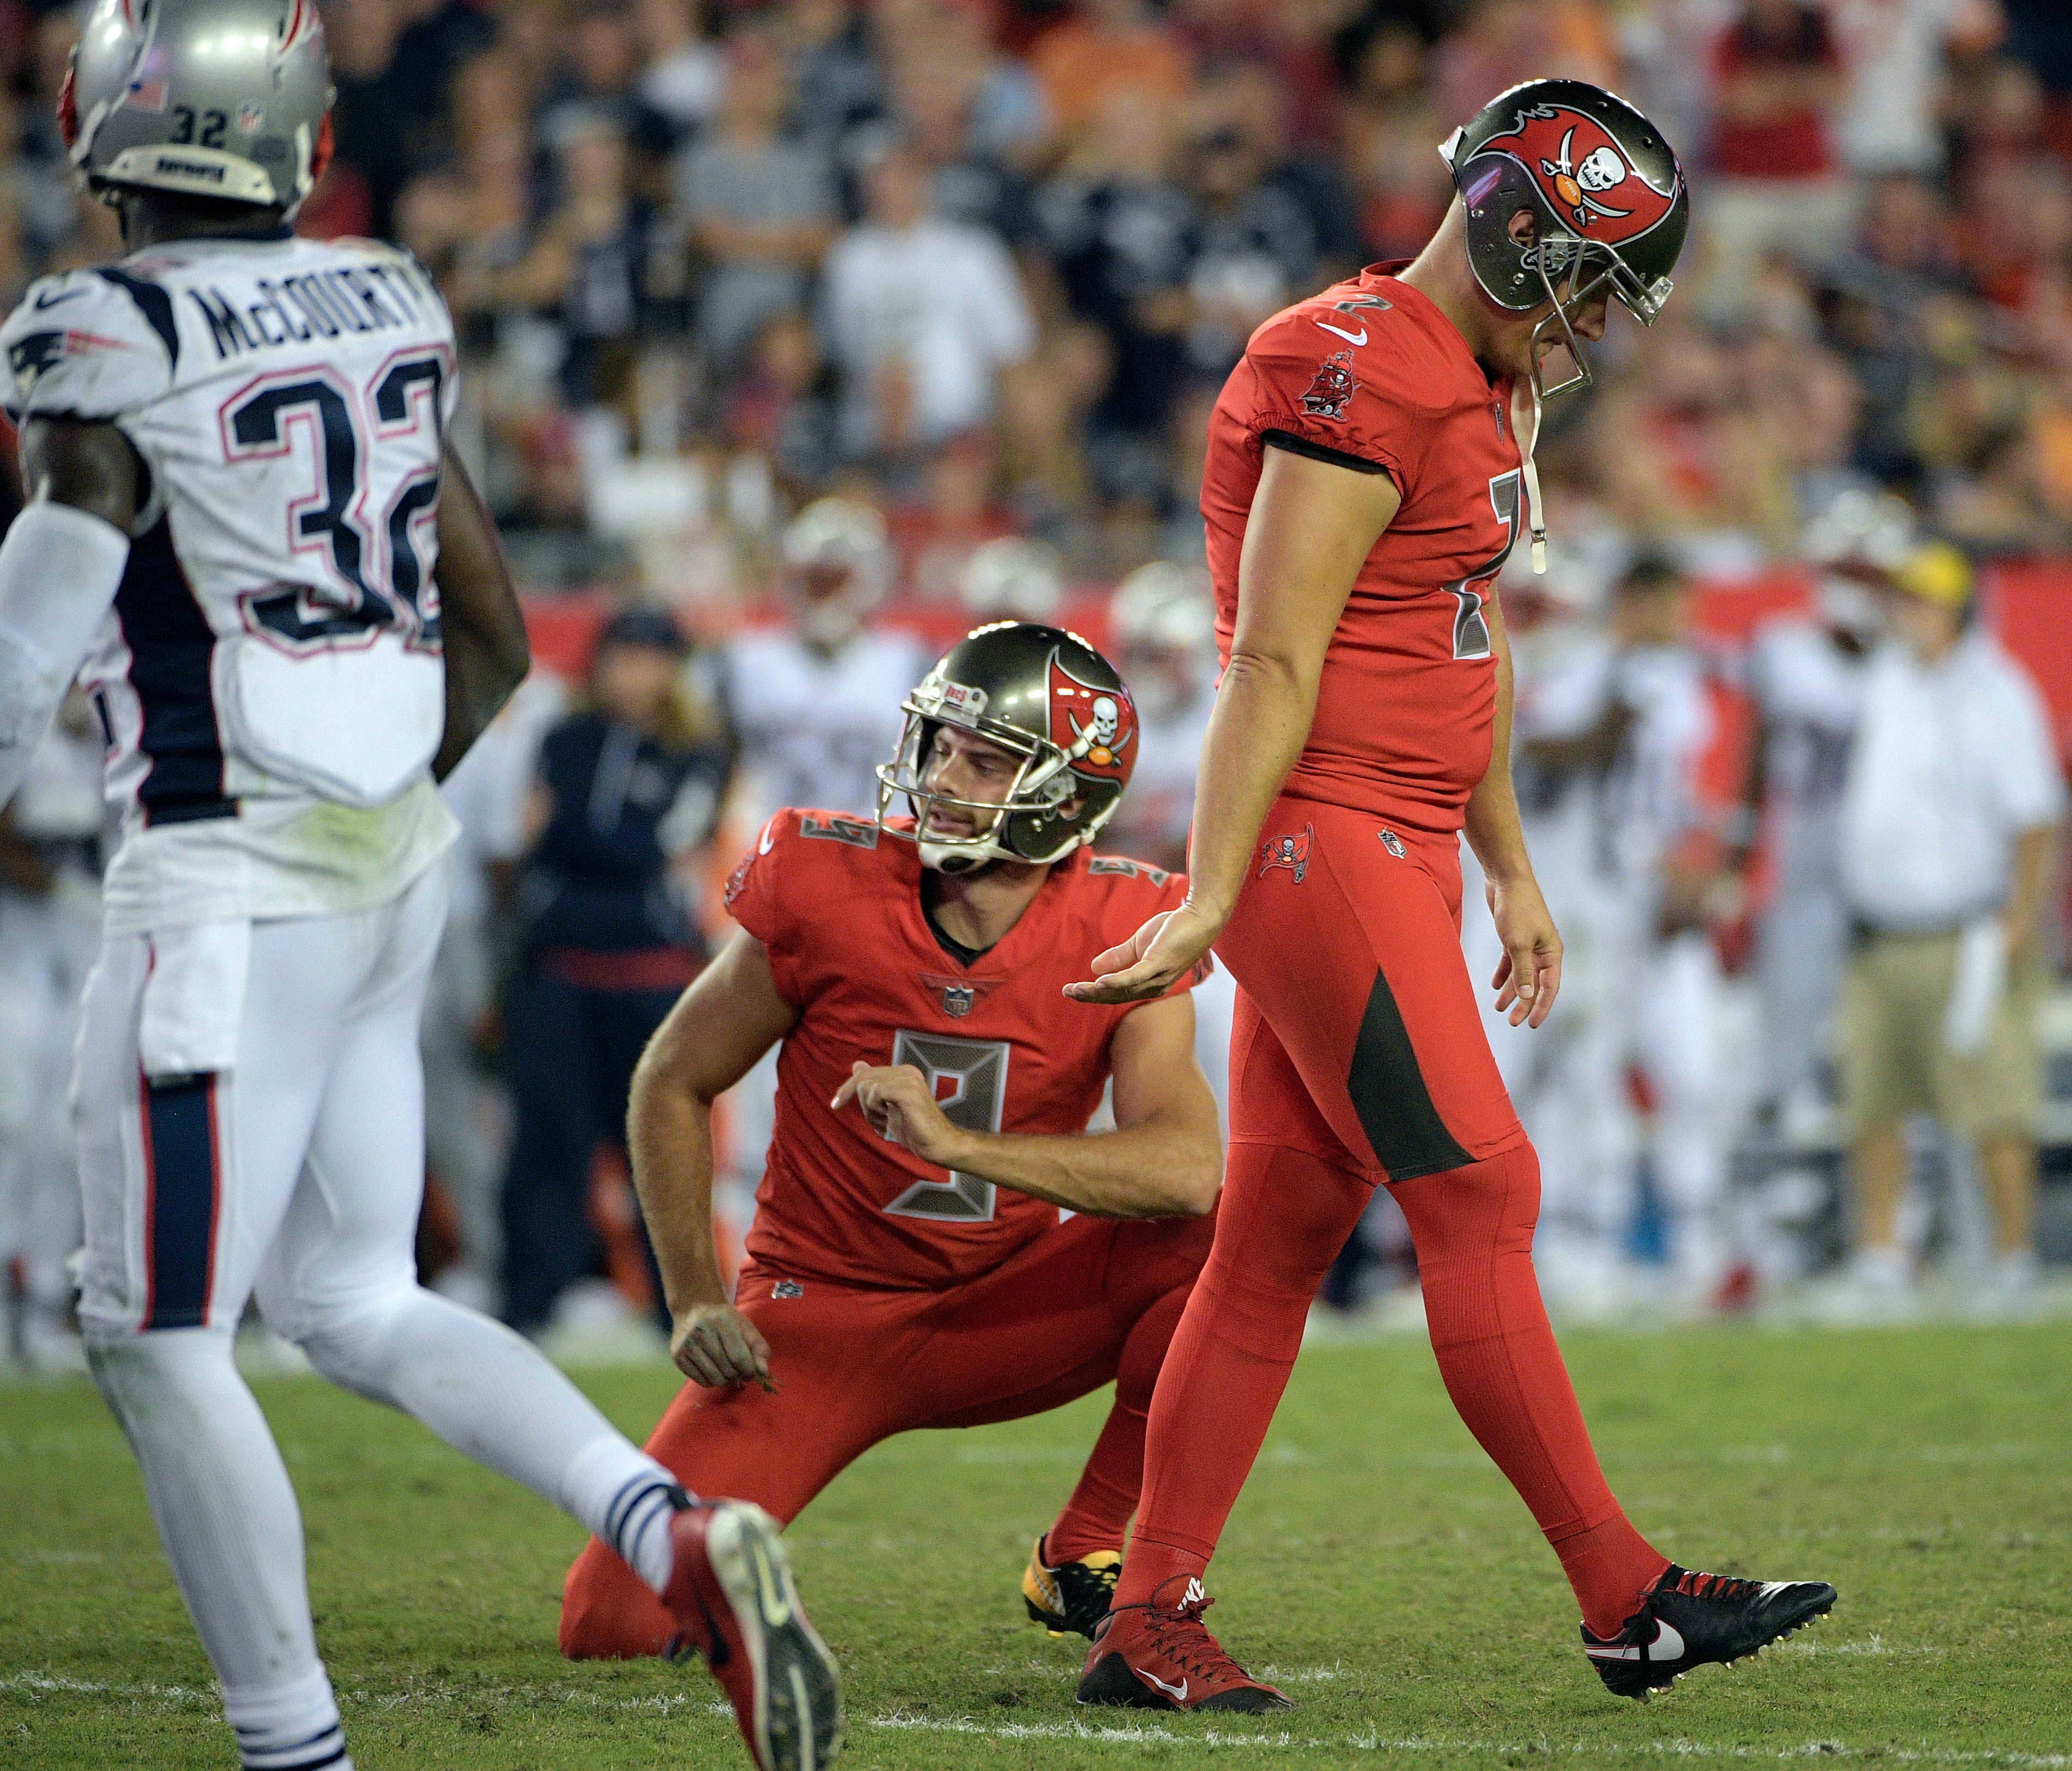 Tampa Bay Buccaneers kicker Nick Folk (2) reacts after missing a field goal against the New England Patriots during the fourth quarter of an NFL football game against the New England Patriots Thursday, Oct. 5, 2017, in Tampa, Fla. Holding for the Buc